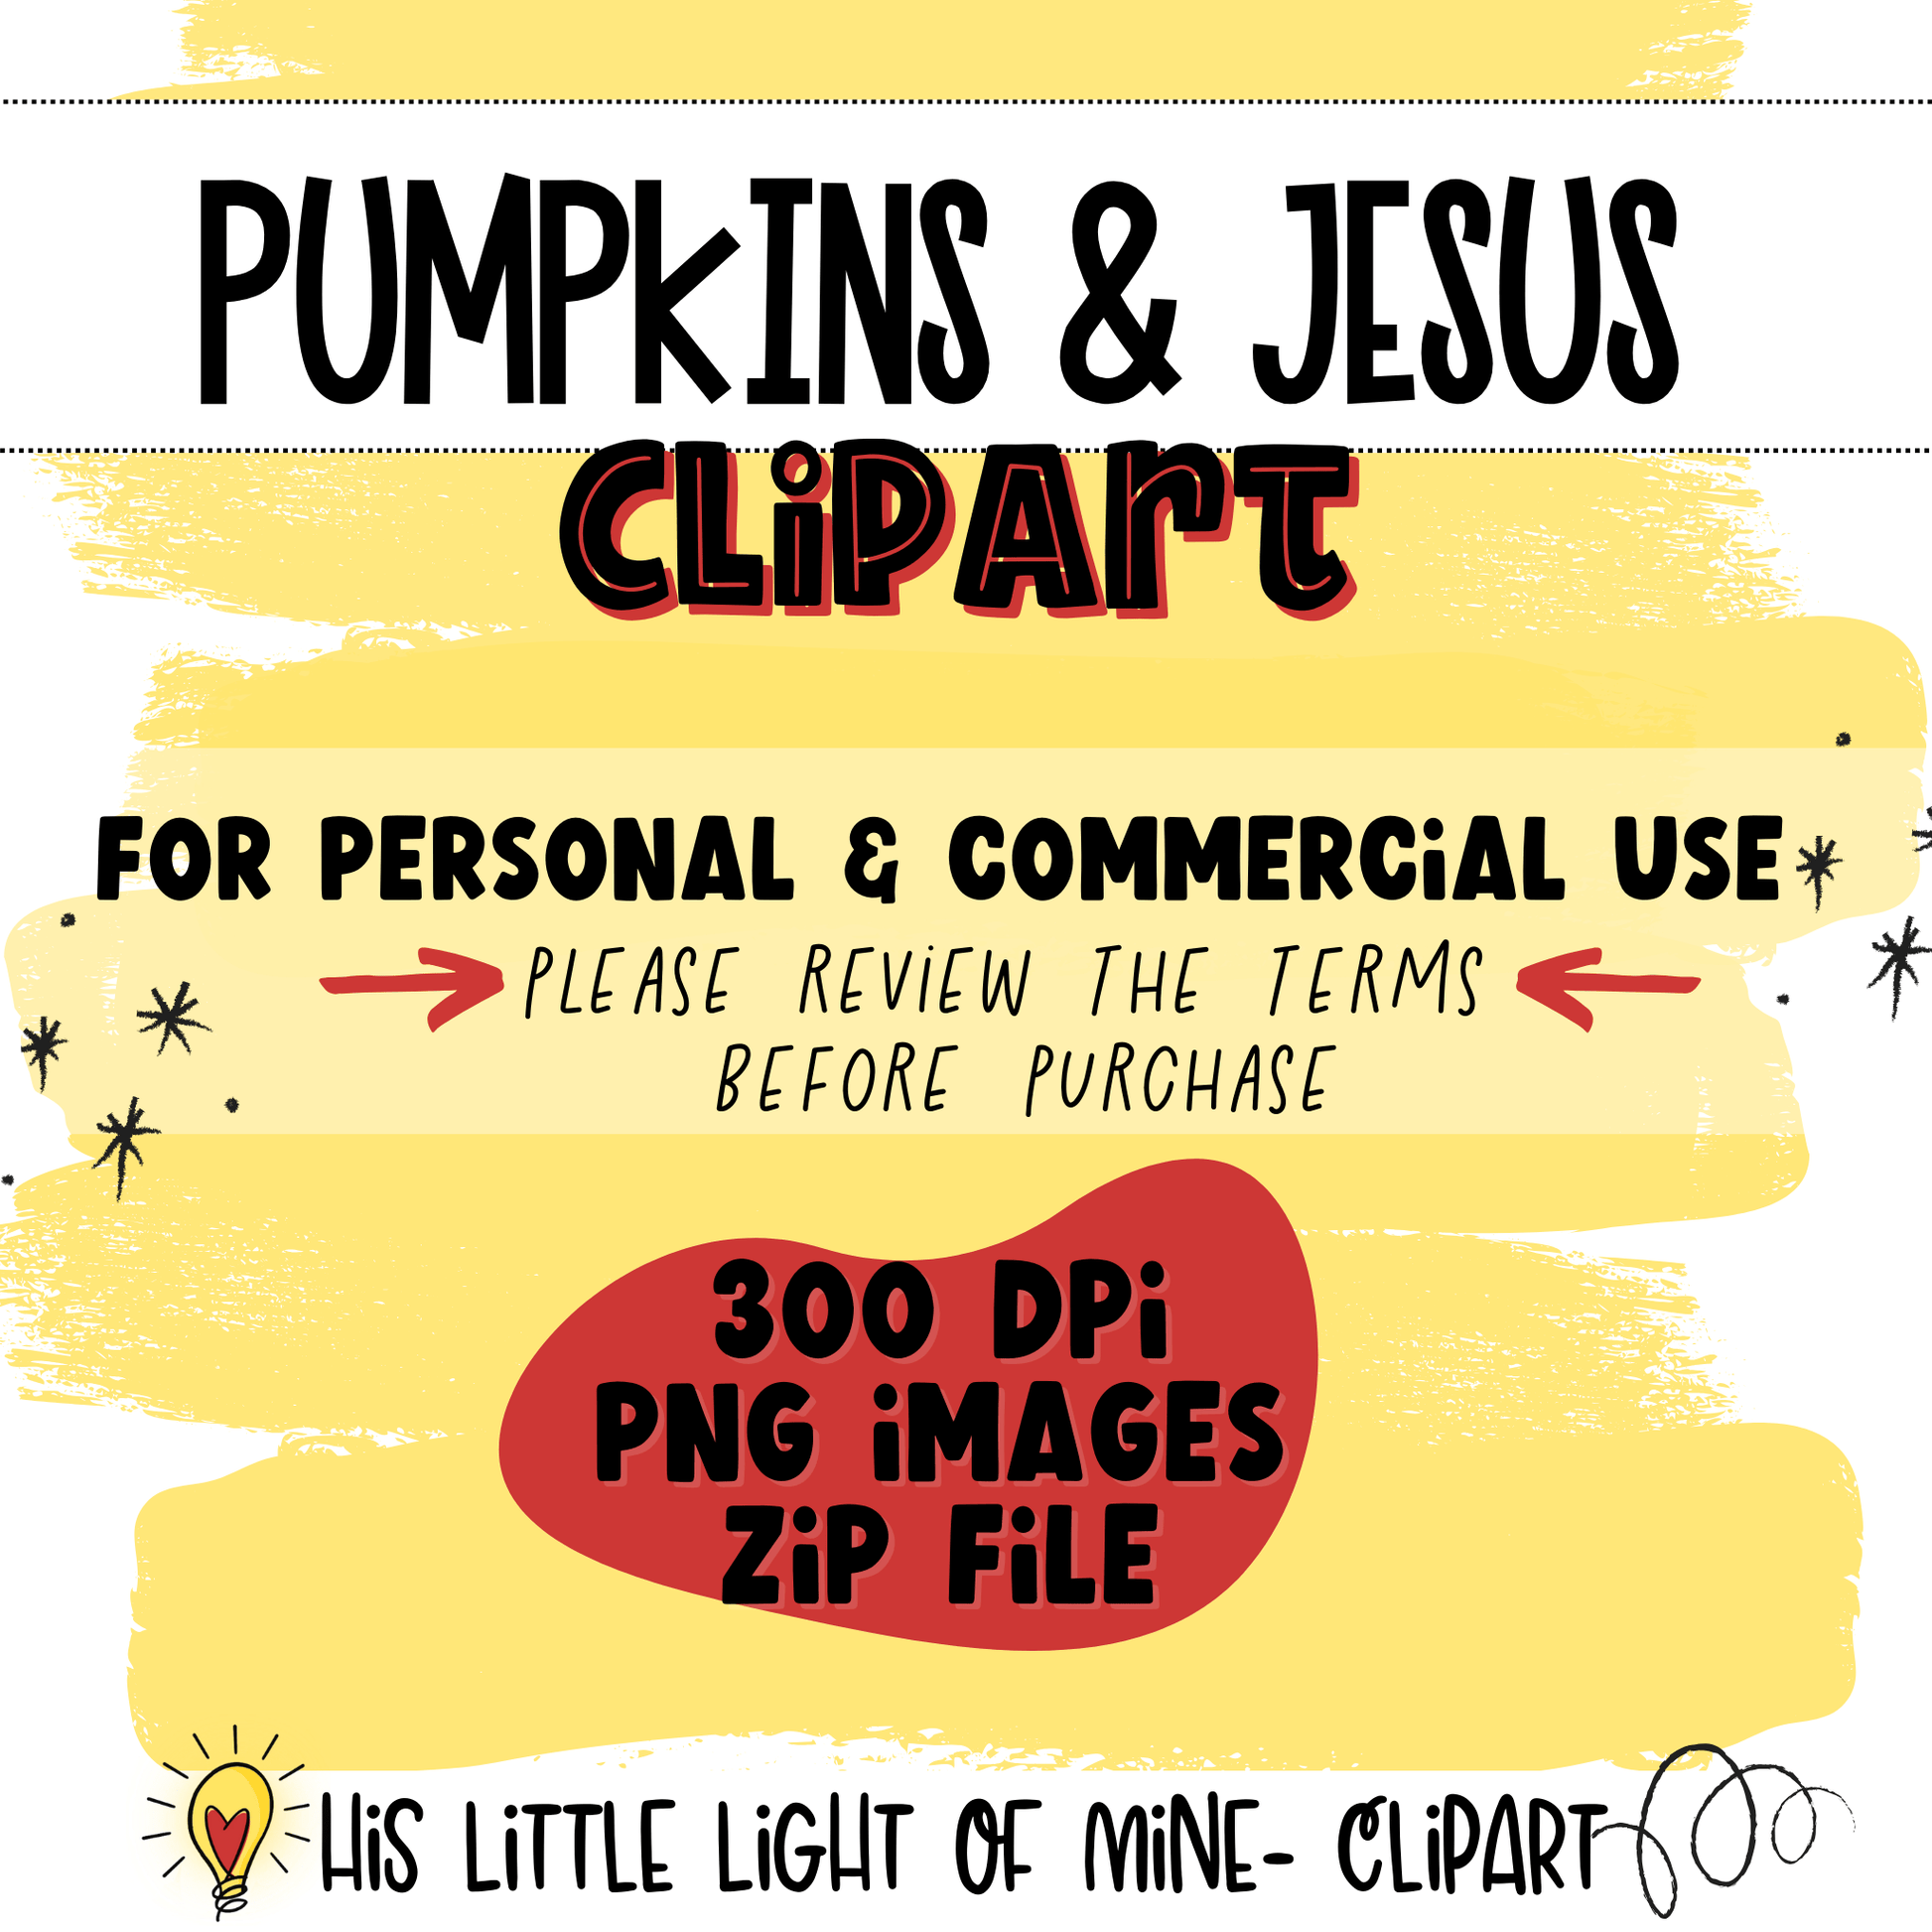 Pumpkins and Jesus clip art pack features both personal and commercial use (with terms) and the types and sizes of the files. 